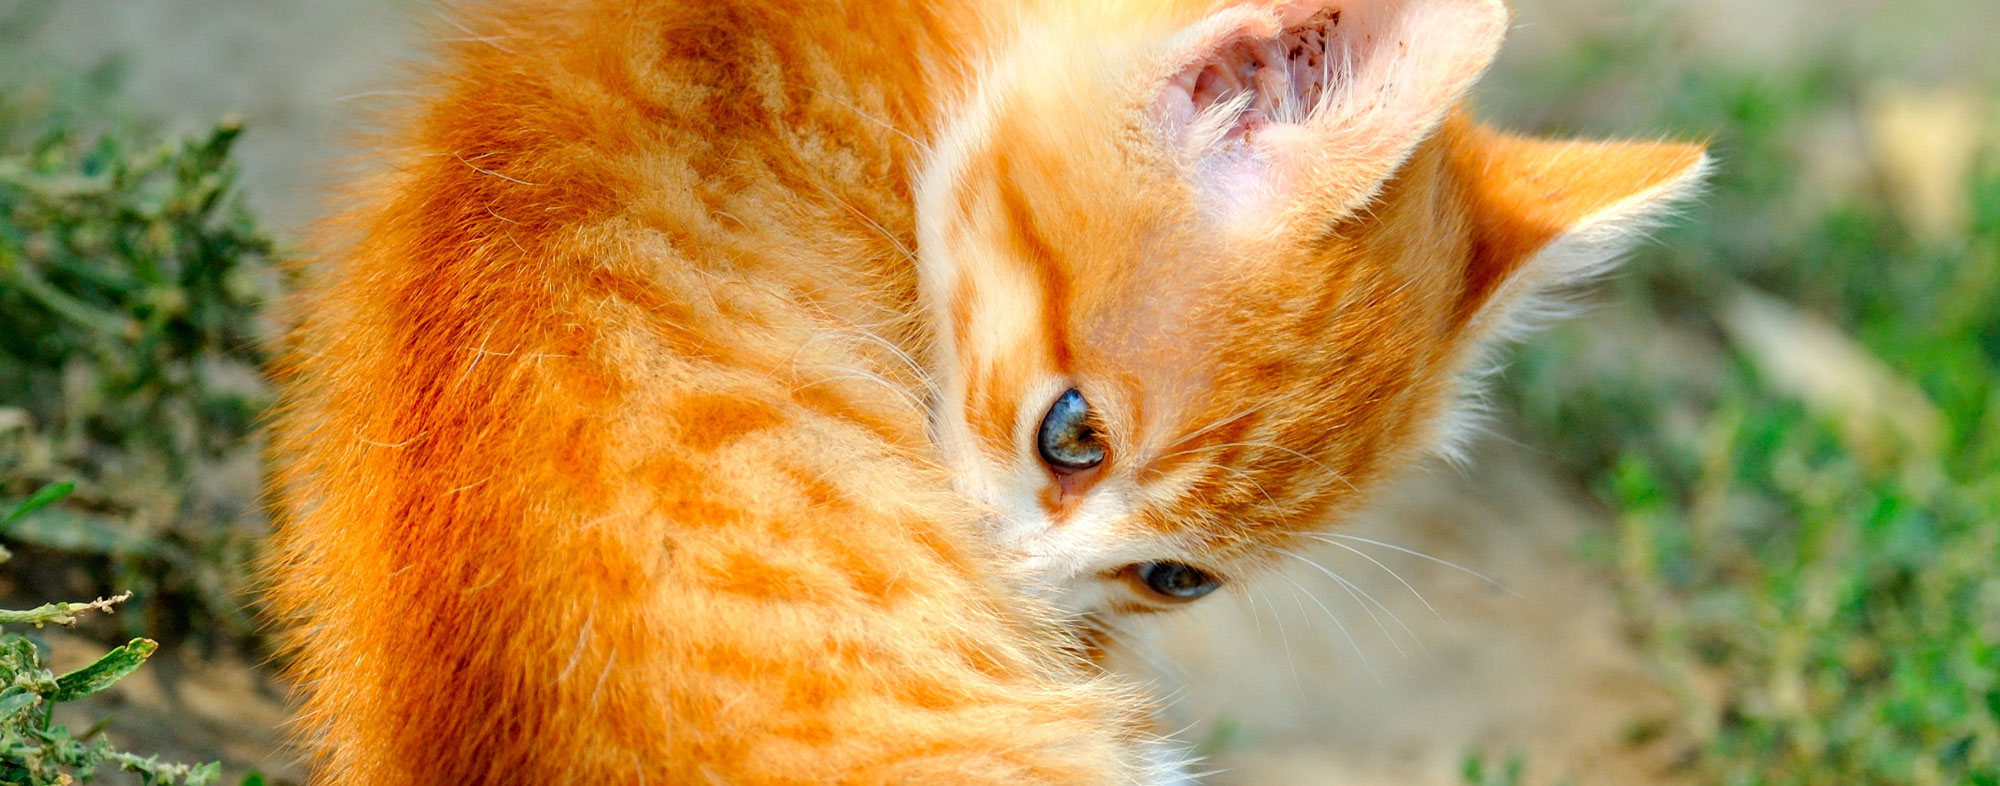 A ginger kitten biting at her back, suffering from an ear mite infection